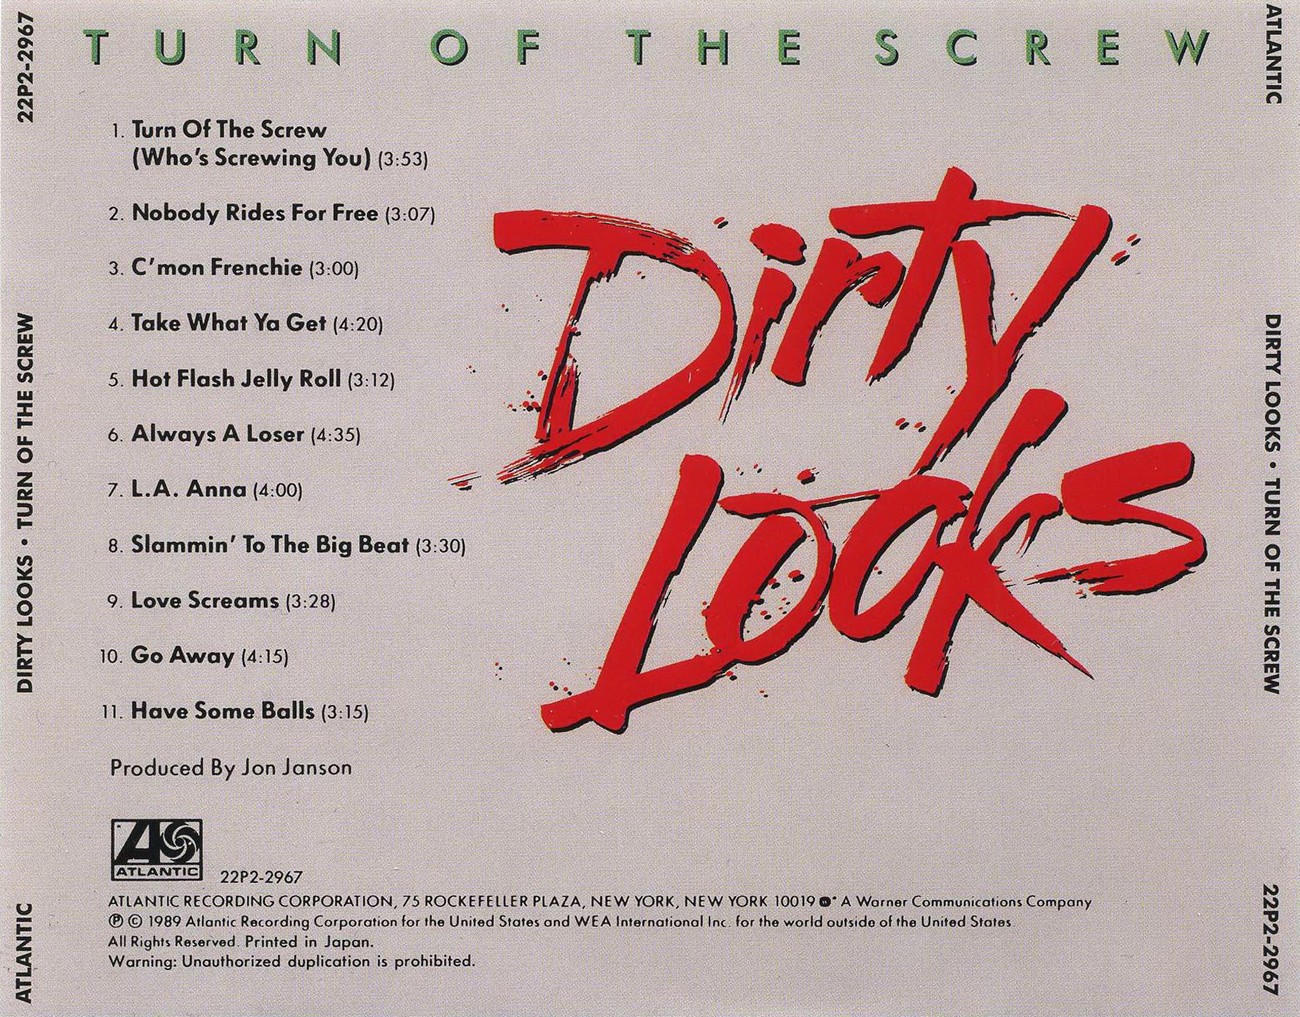 "Turn of the Screw" by Dirty Looks CD-R (Non-Record Label). 